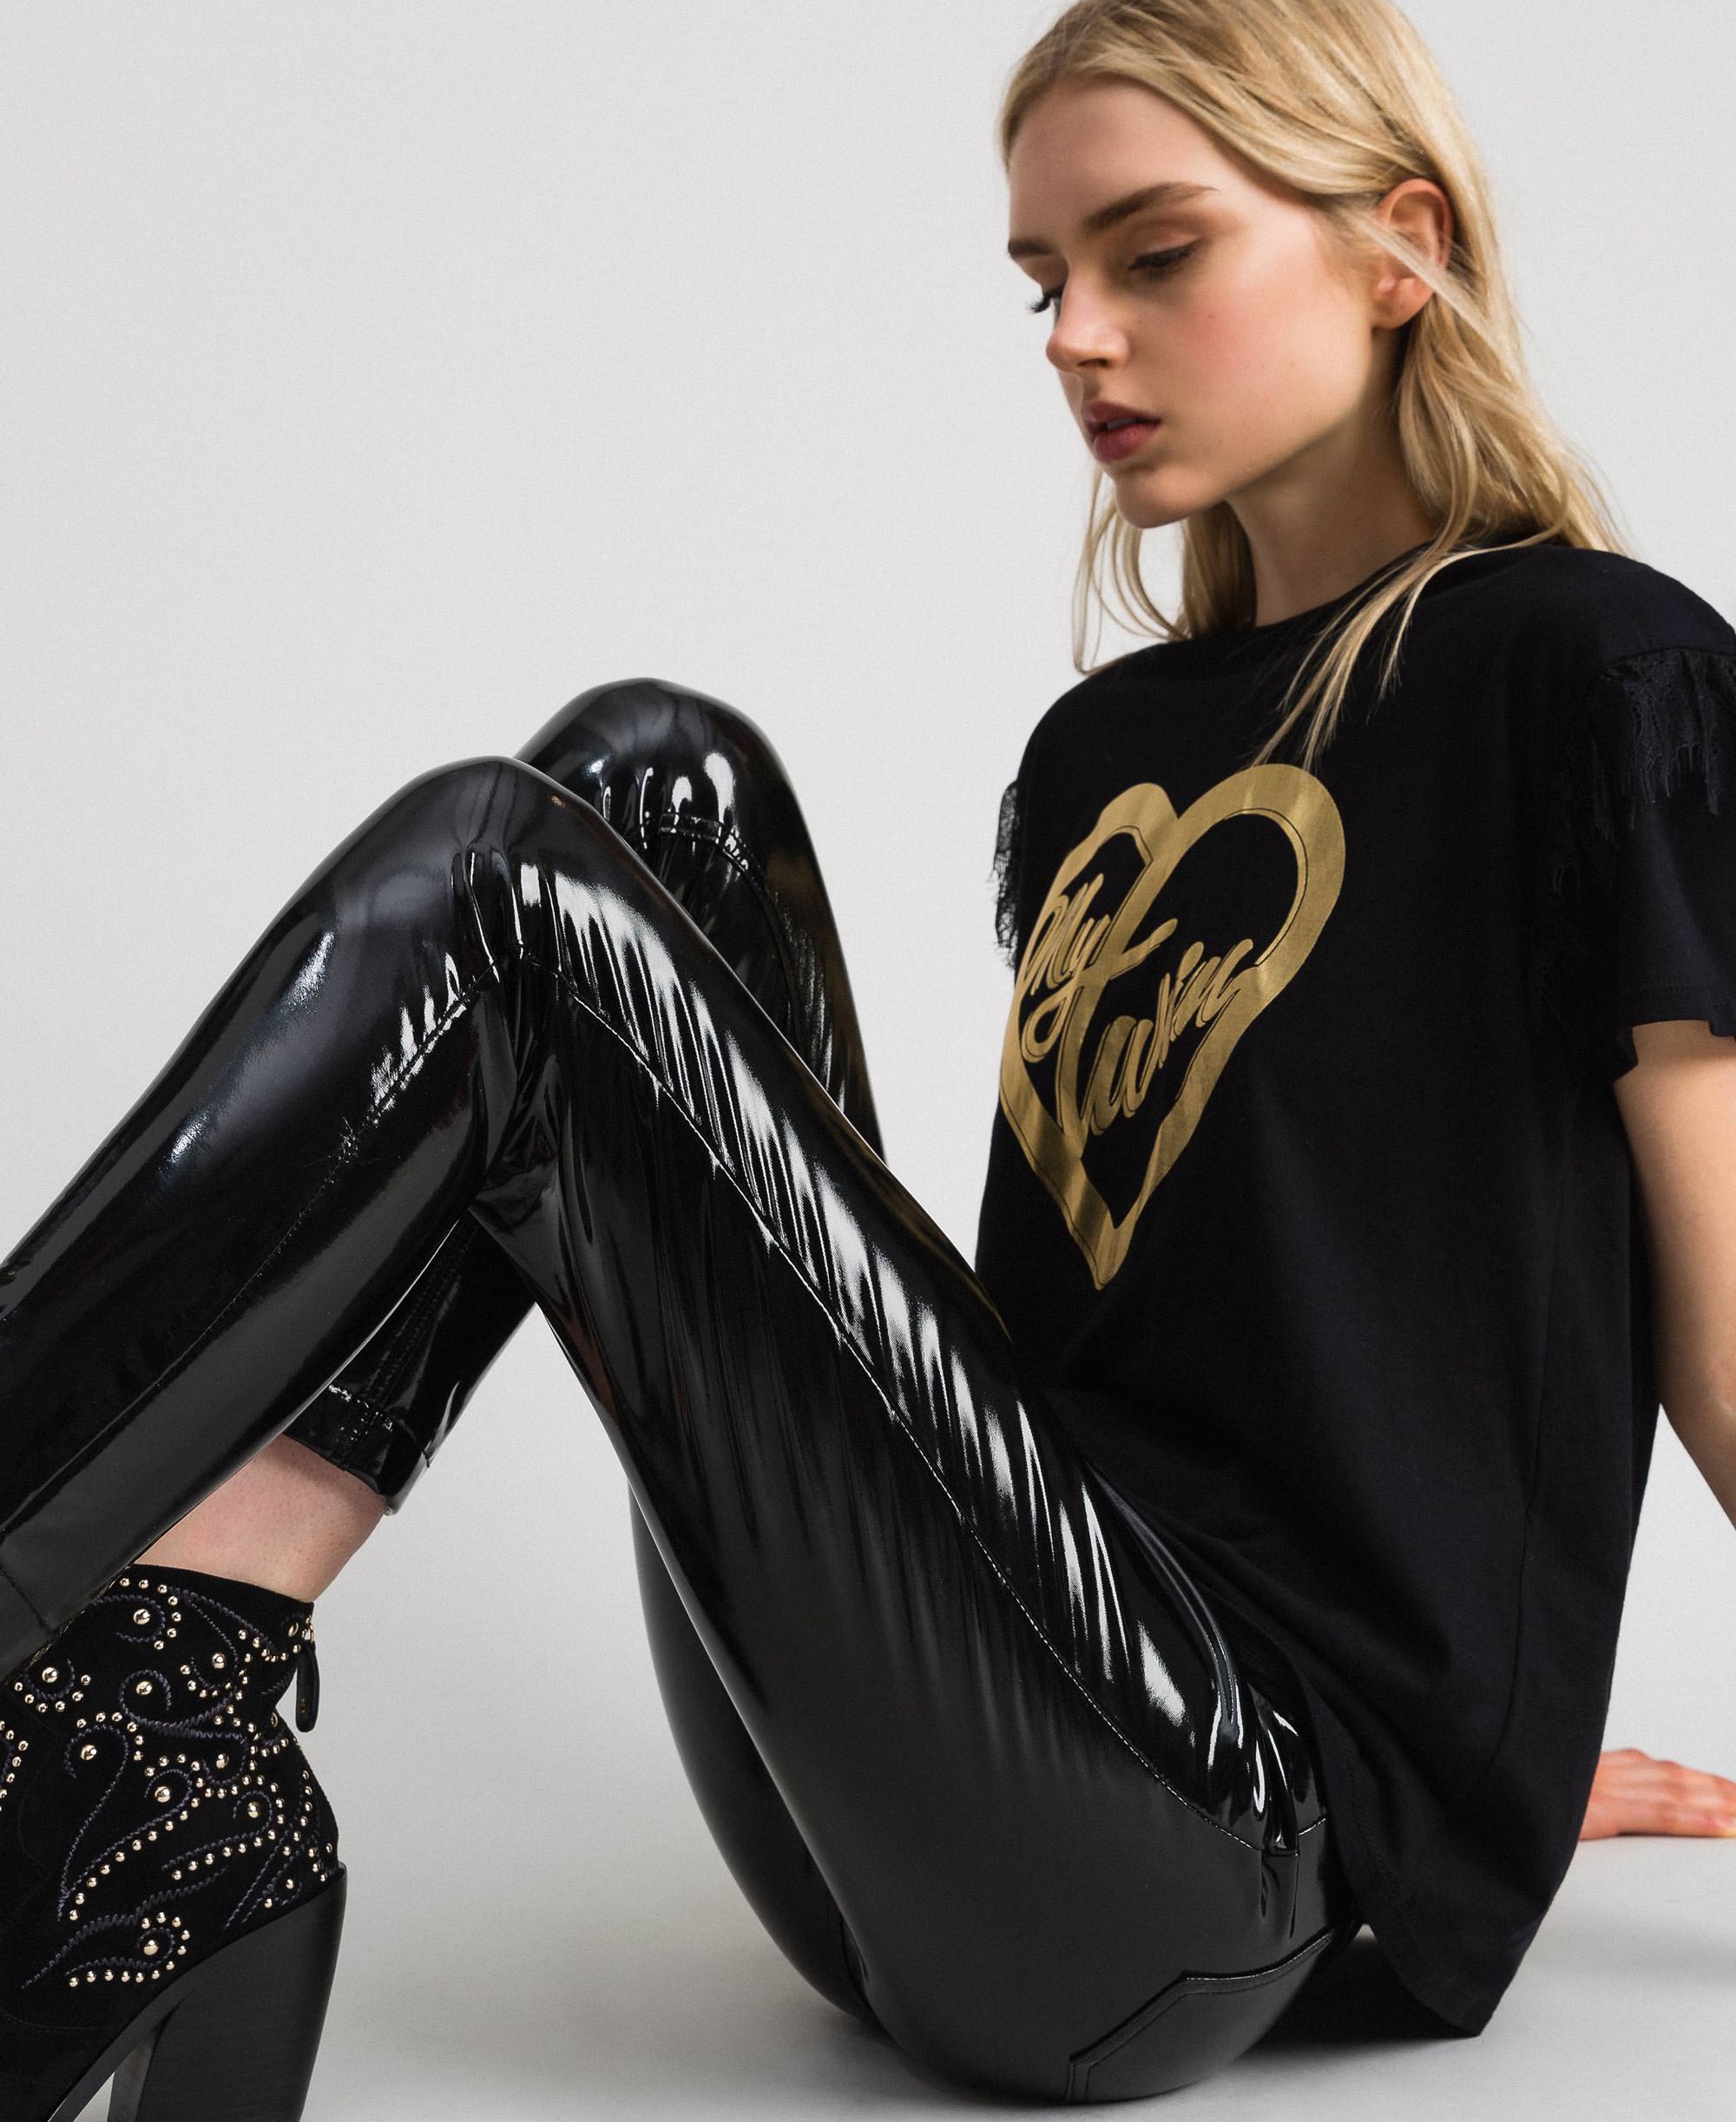 Patent leather effect faux leather leggings Woman, Black | TWINSET Milano